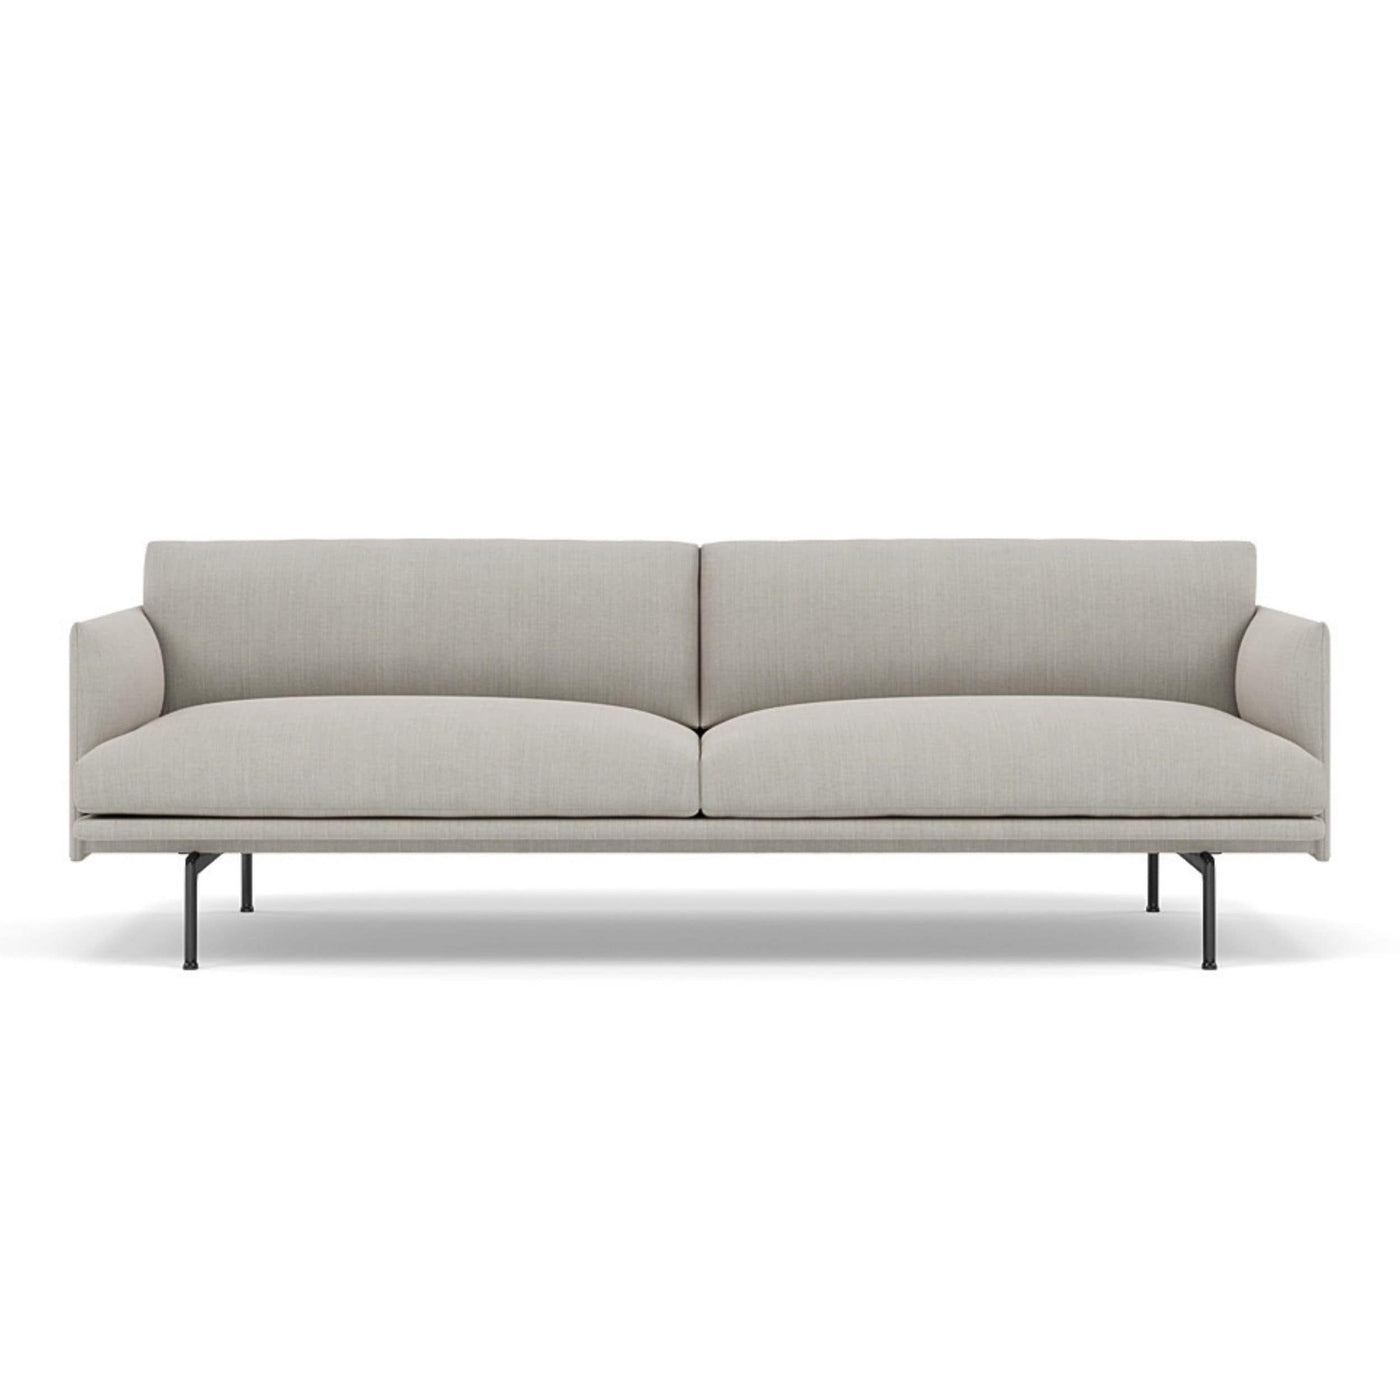 Muuto outline 3 seater sofa with black legs. Made to order from someday designs. #colour_fiord-201